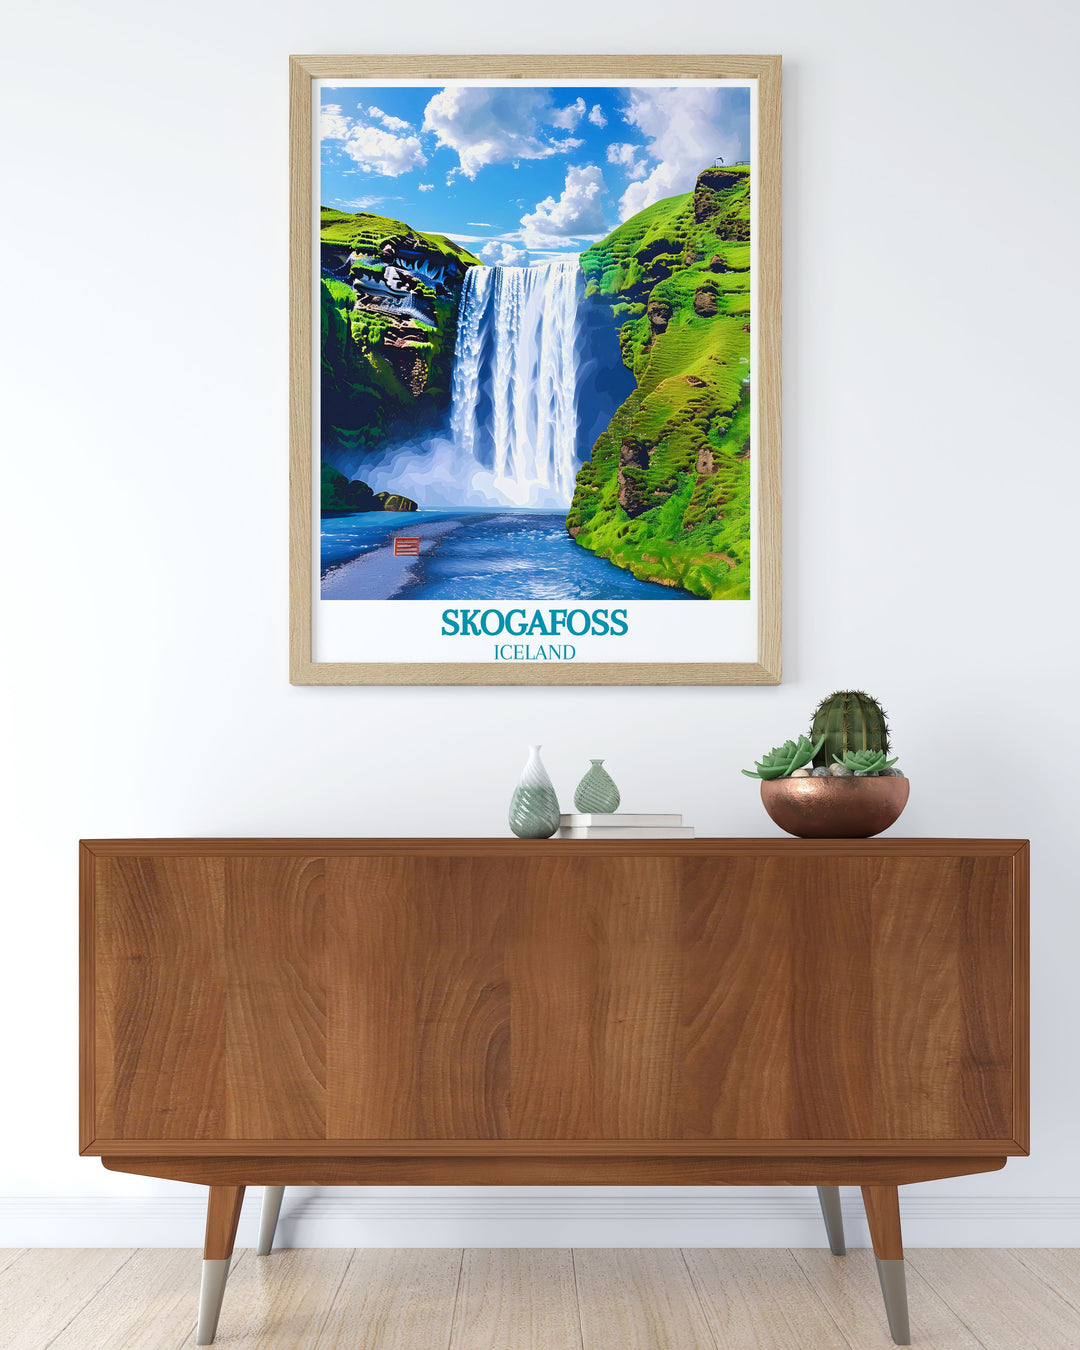 Explore the natural wonder of Skogafoss through this exquisite travel poster, illustrating the dramatic waterfall and the scenic beauty of the Icelandic countryside.